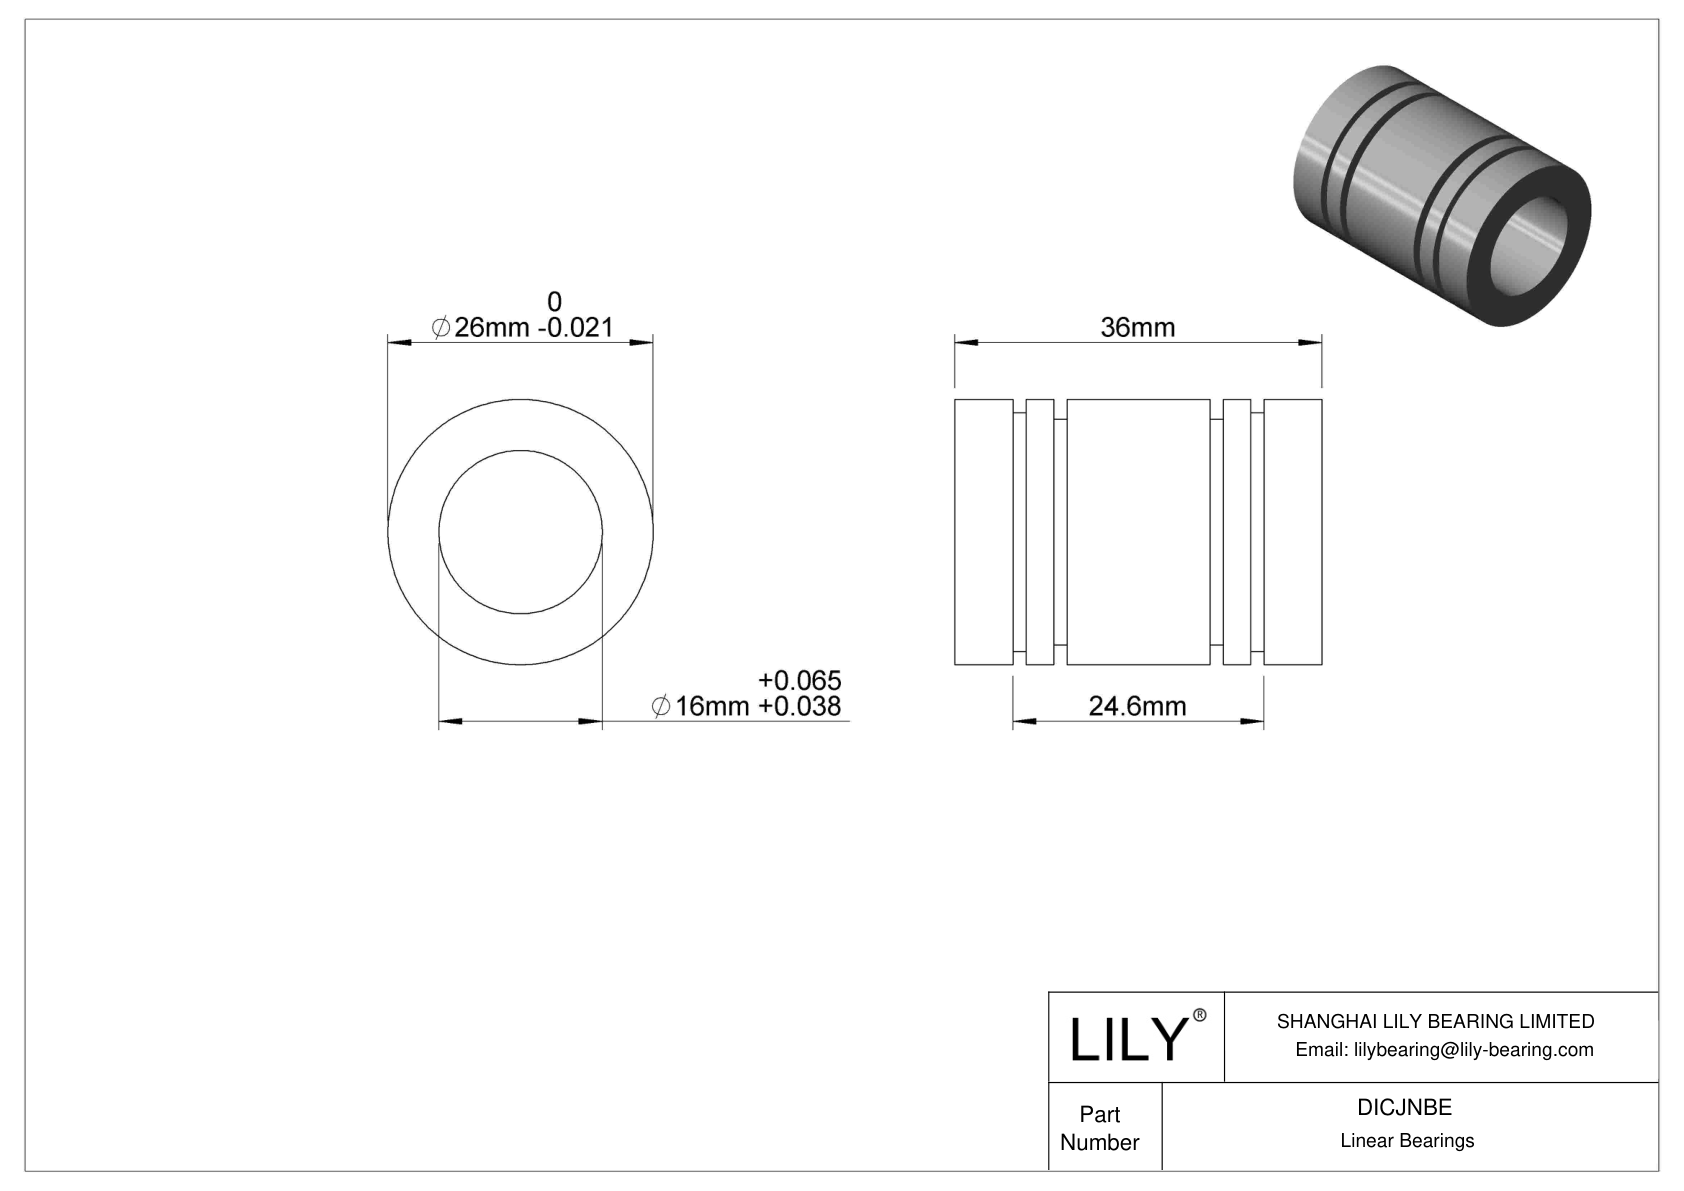 DICJNBE Common Linear Sleeve Bearings cad drawing